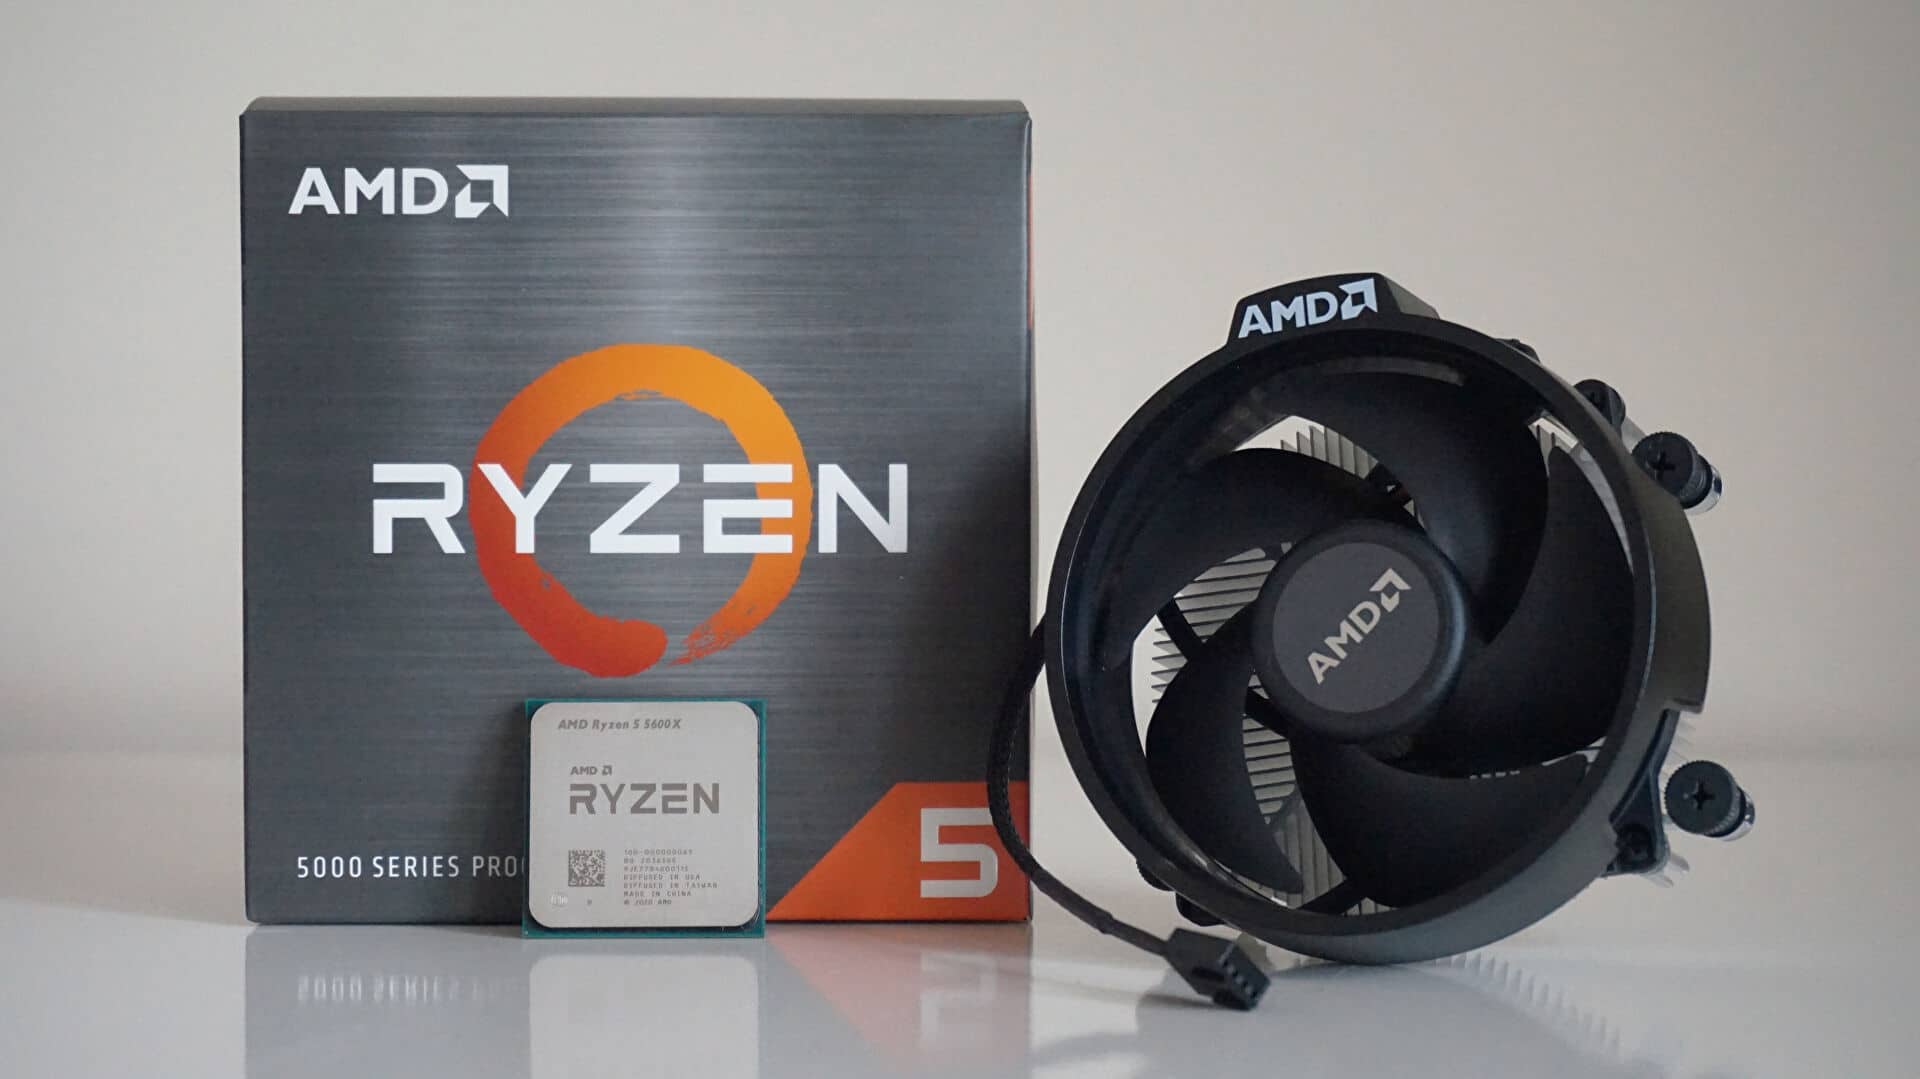 Get a brand new AMD Ryzen 5 5600X for $176 with this Ebay code